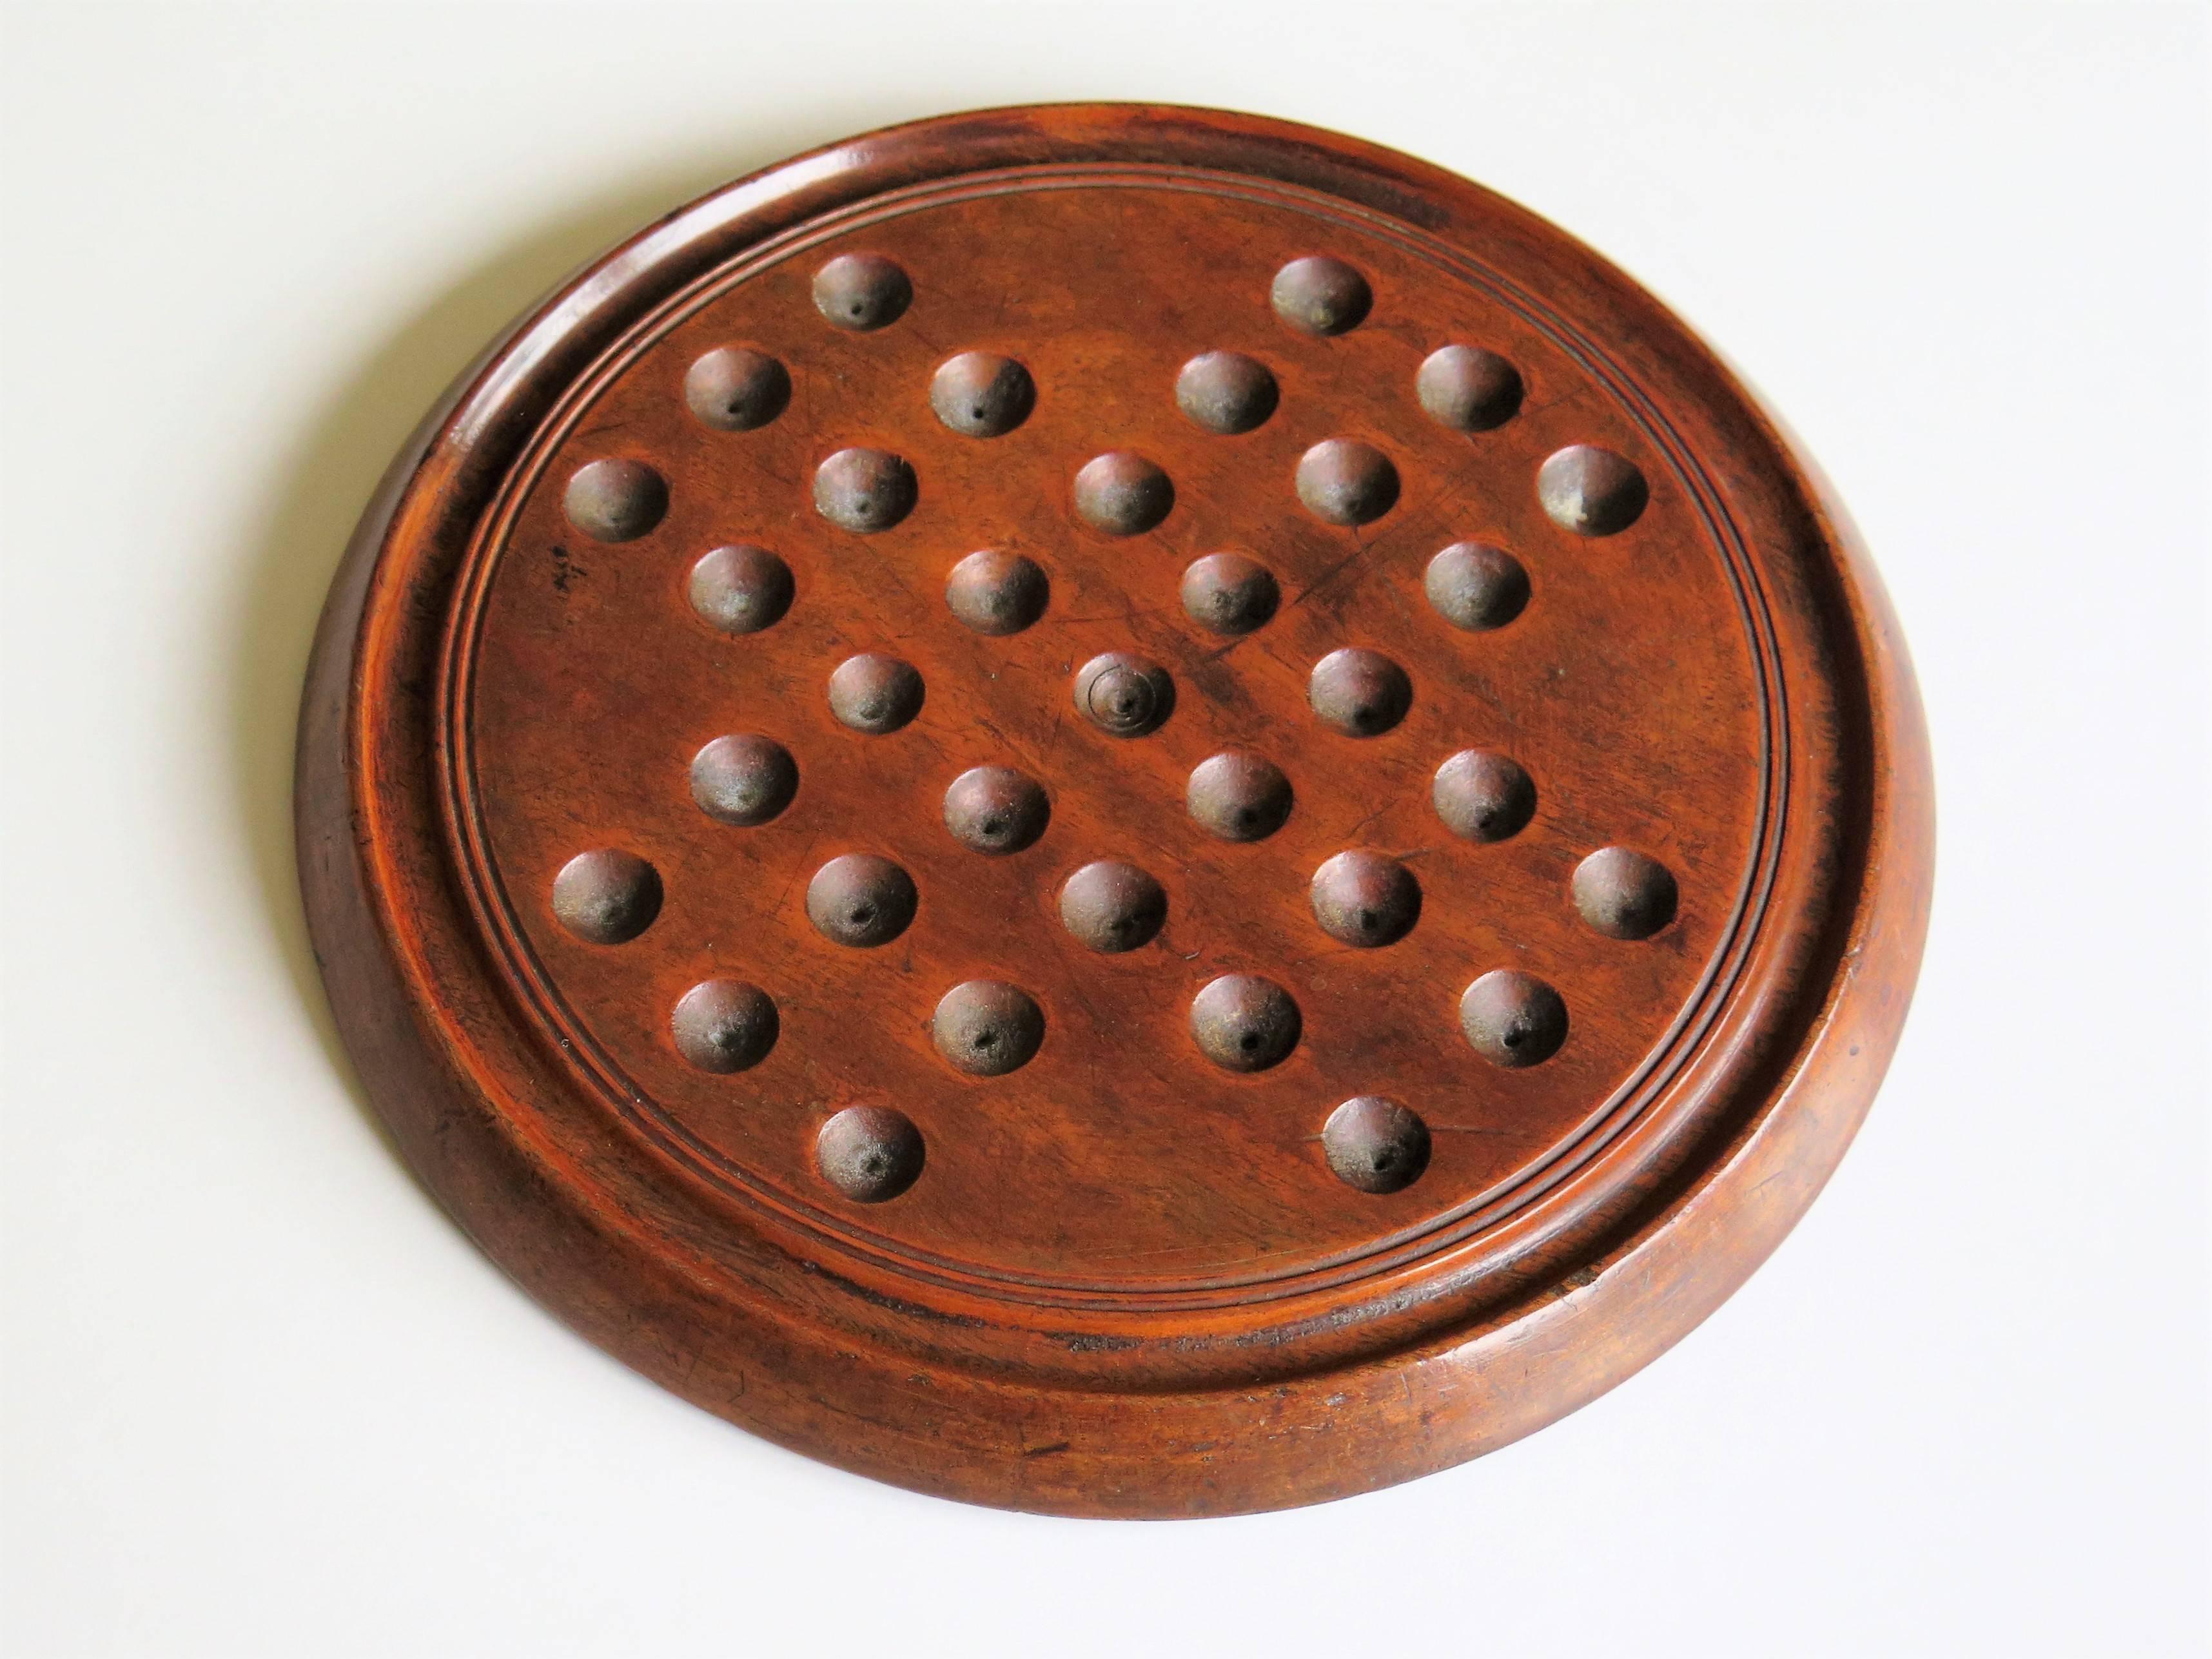 Mahogany Mid-19th Century Solitaire Marble Board Game with 32 Early Handmade Marbles